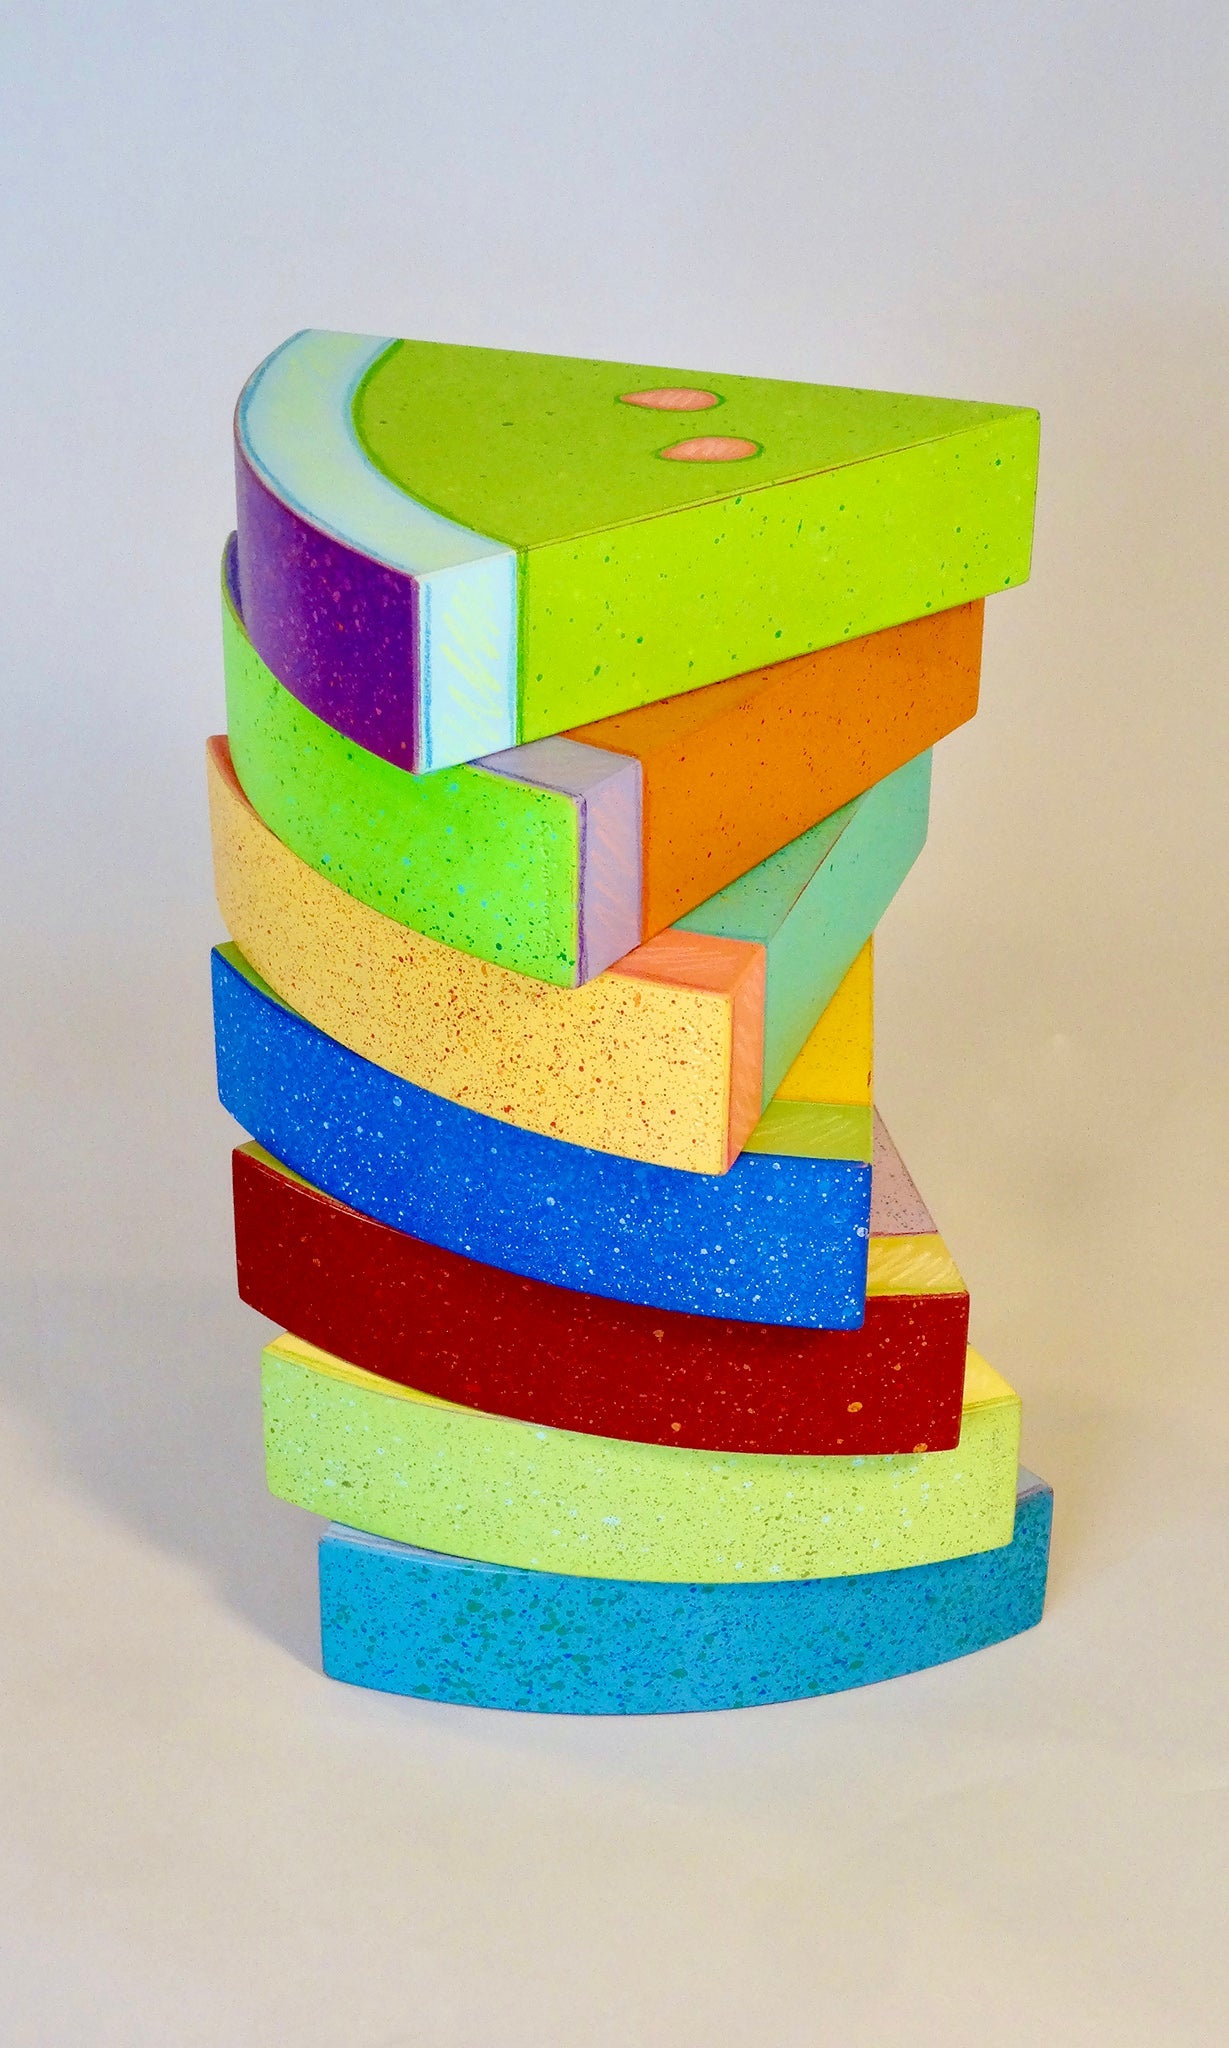 Wooden sculpture depicting slices of watermelon stacked on each other. All of the slices are unnatural colors including orange, green, purple, and blue. 2020 7.5"x7.5"x1.75" each (7 pieces total) painted wood Sean O'Meallie